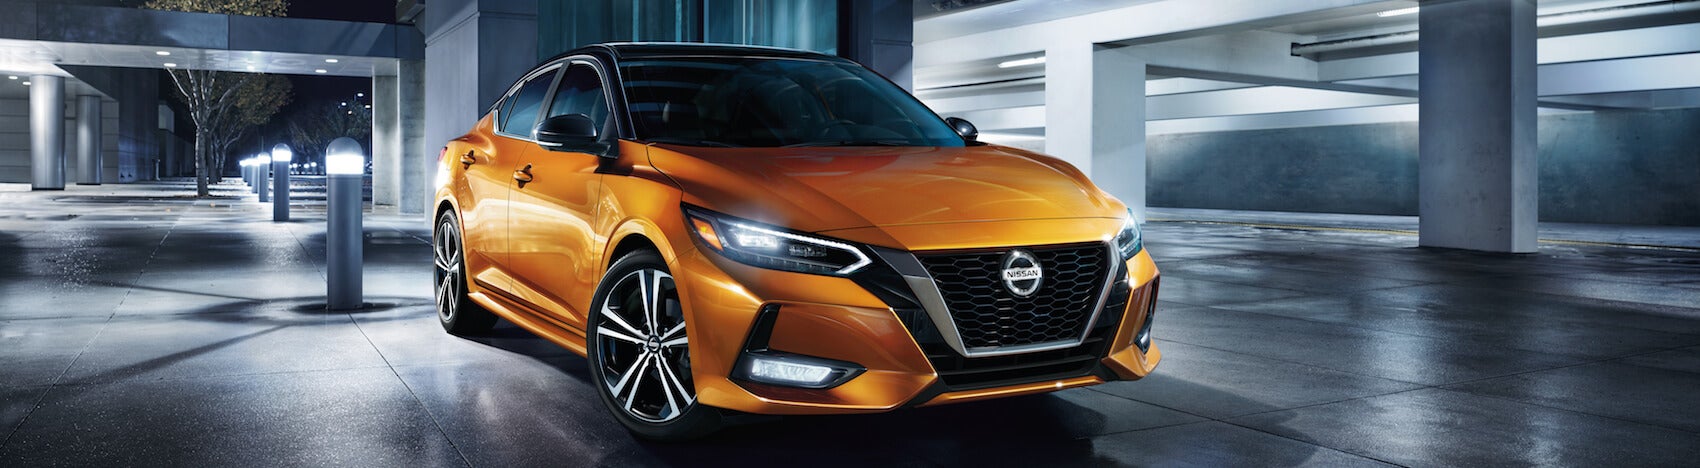 2020 Nissan Sentra dealerships near Indianapolis, IN